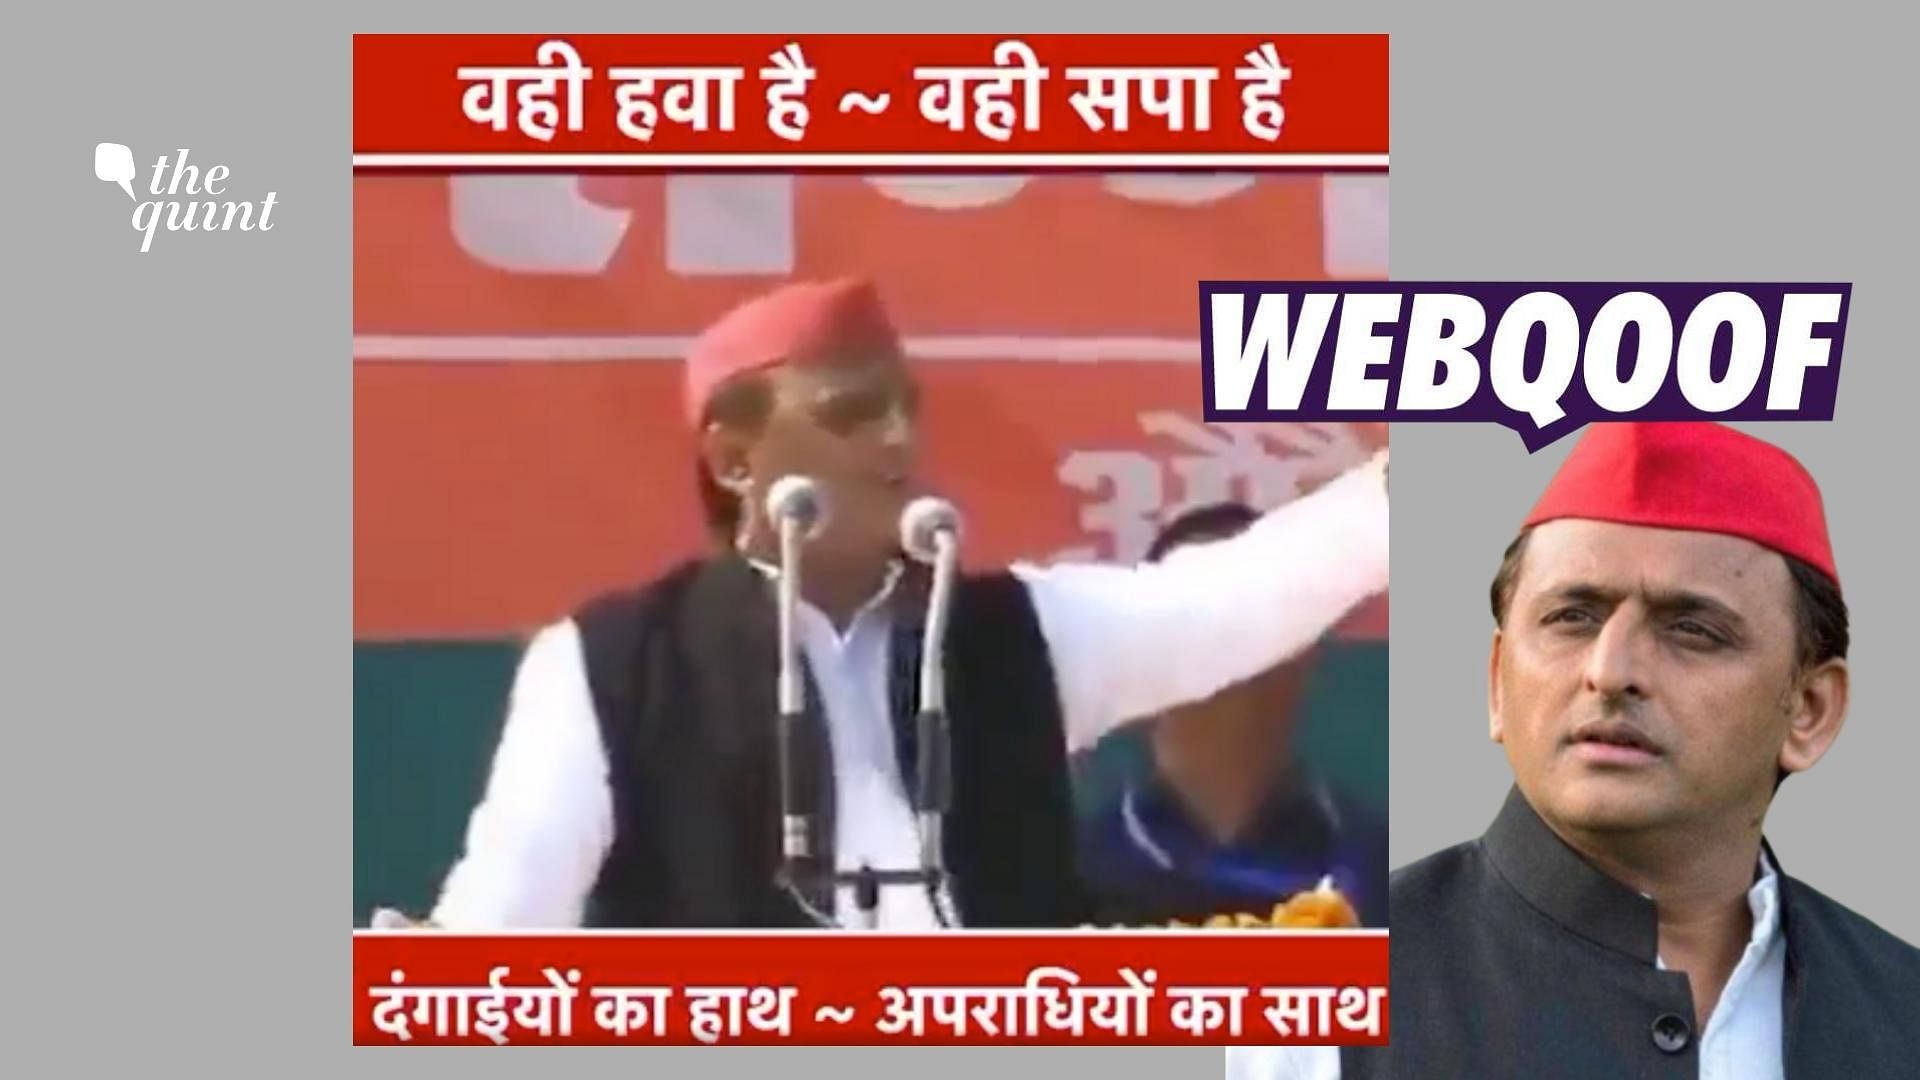 <div class="paragraphs"><p>The claim states that Akhilesh Yadav had said those who don't want to follow the law of the land must vote for Samajwadi Party.&nbsp;</p></div>